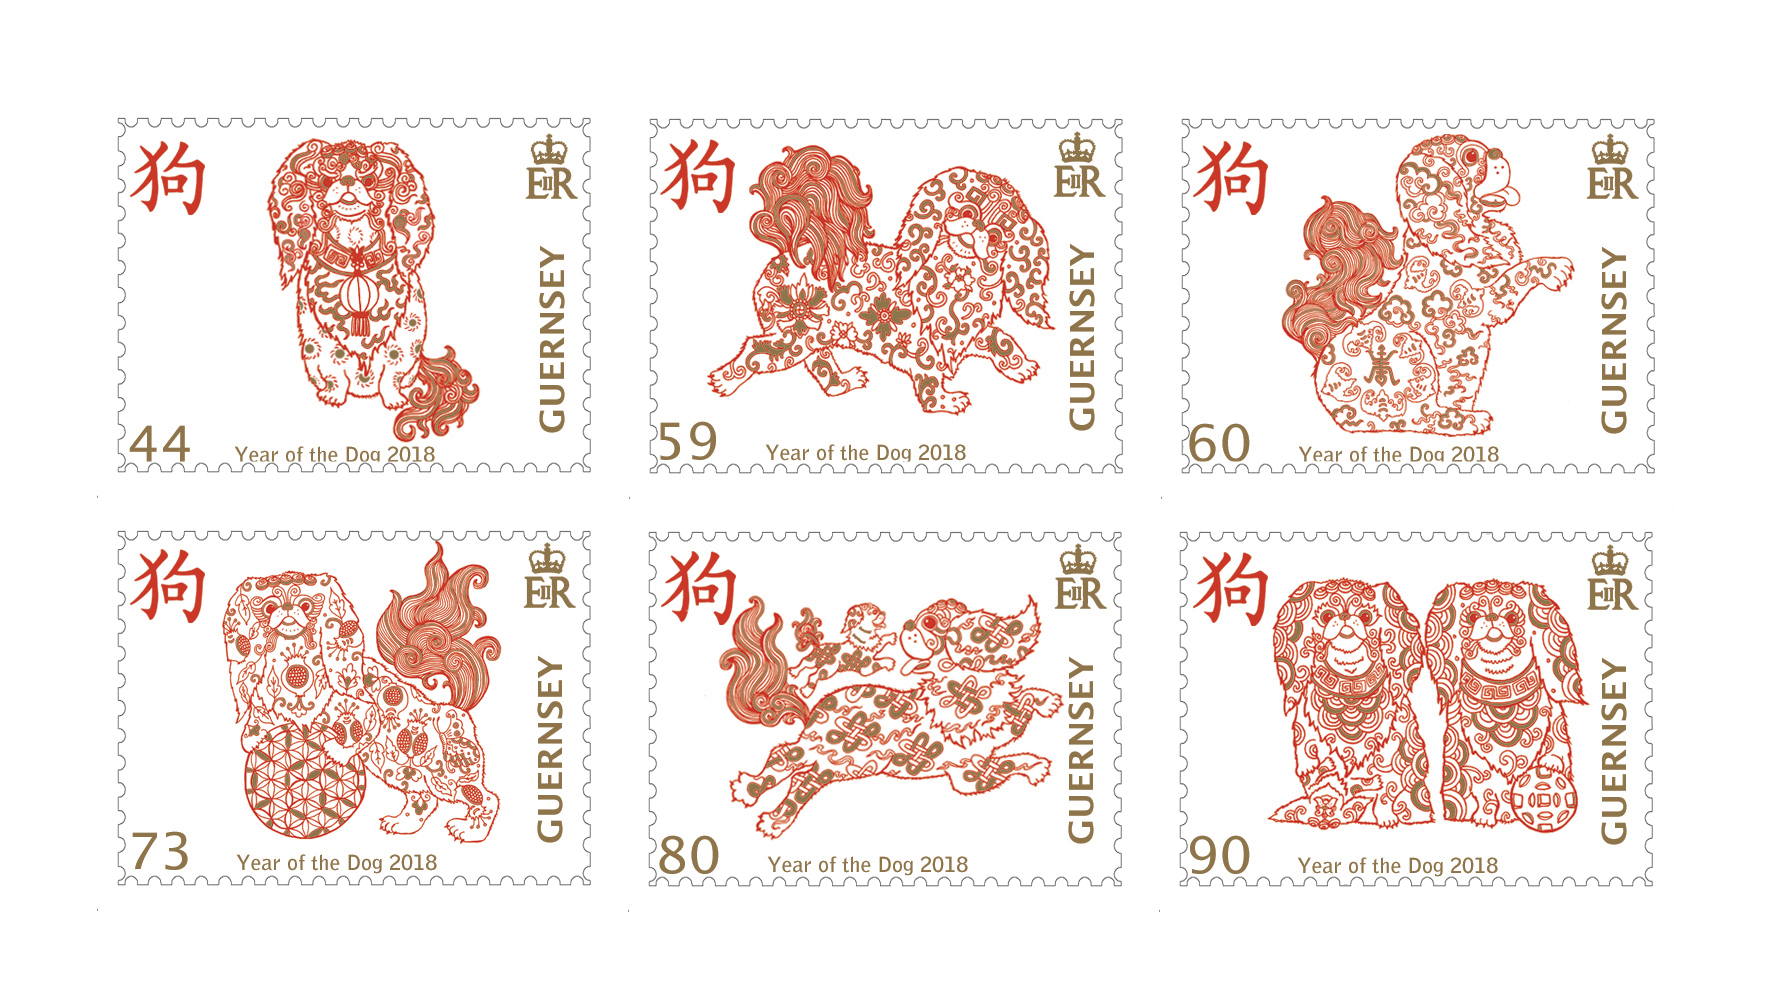 Guernsey Post celebrates Chines New Year with fifth stamp issue